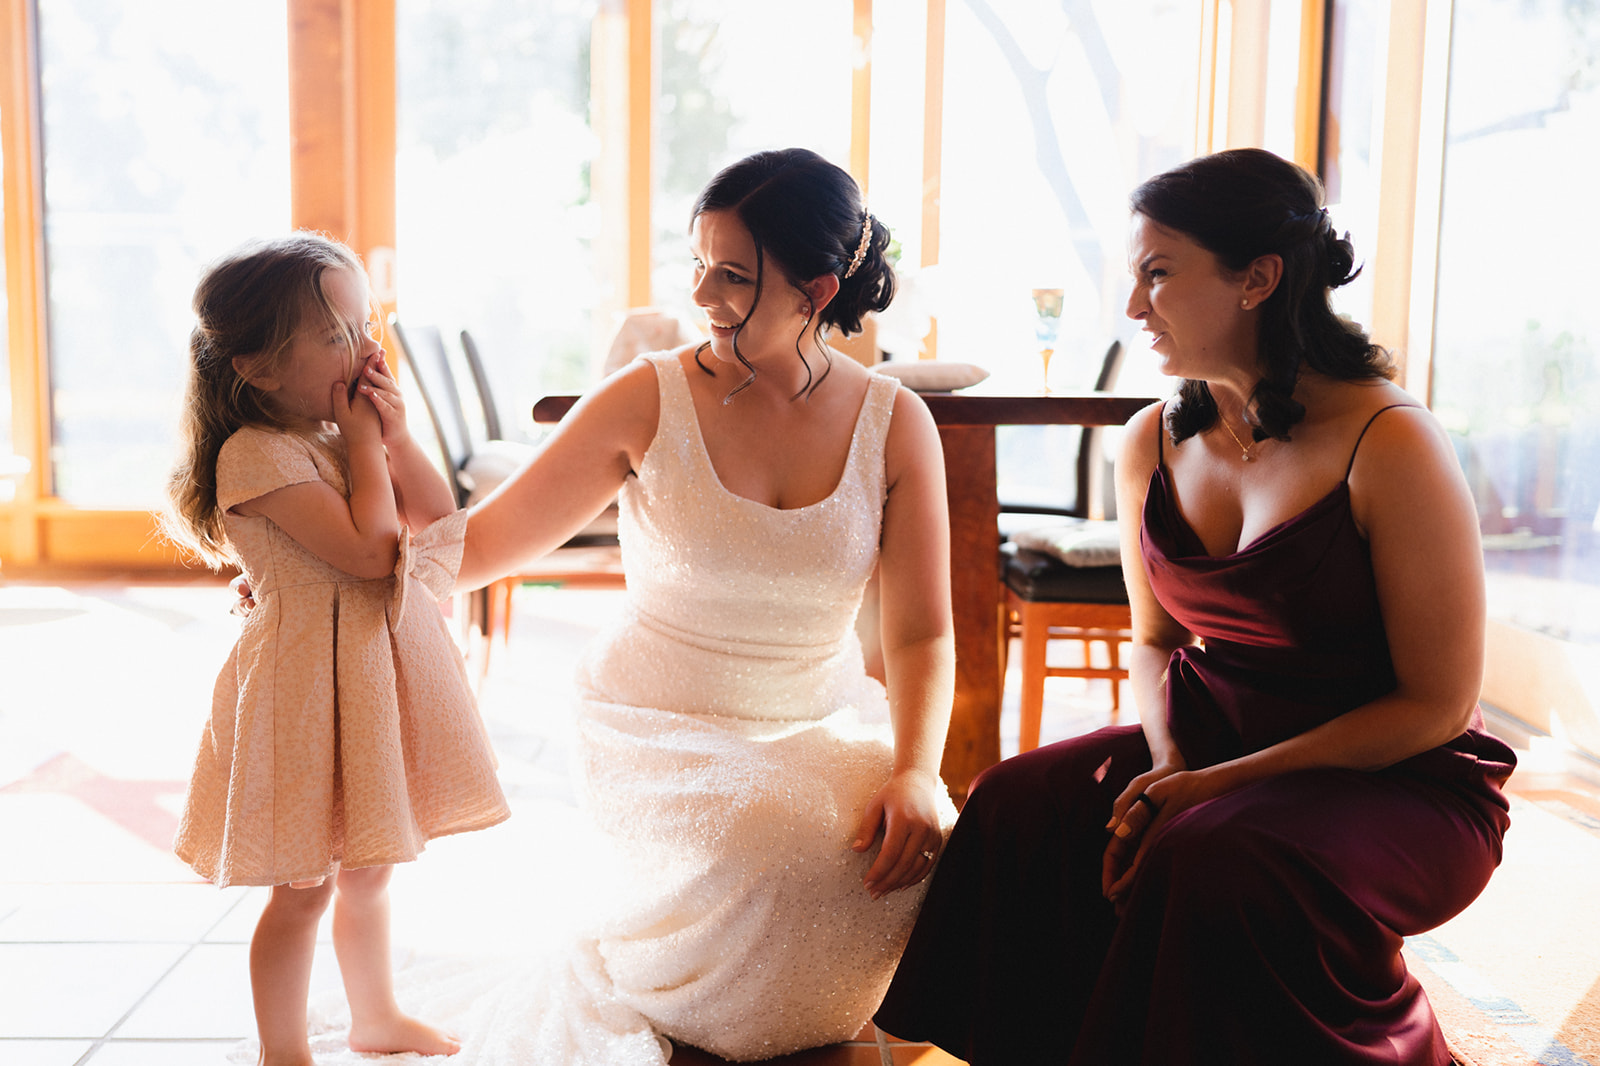 Helen's Hill Winery wedding for Jen and Cam. Photographed by Alex Colcheedas Photography